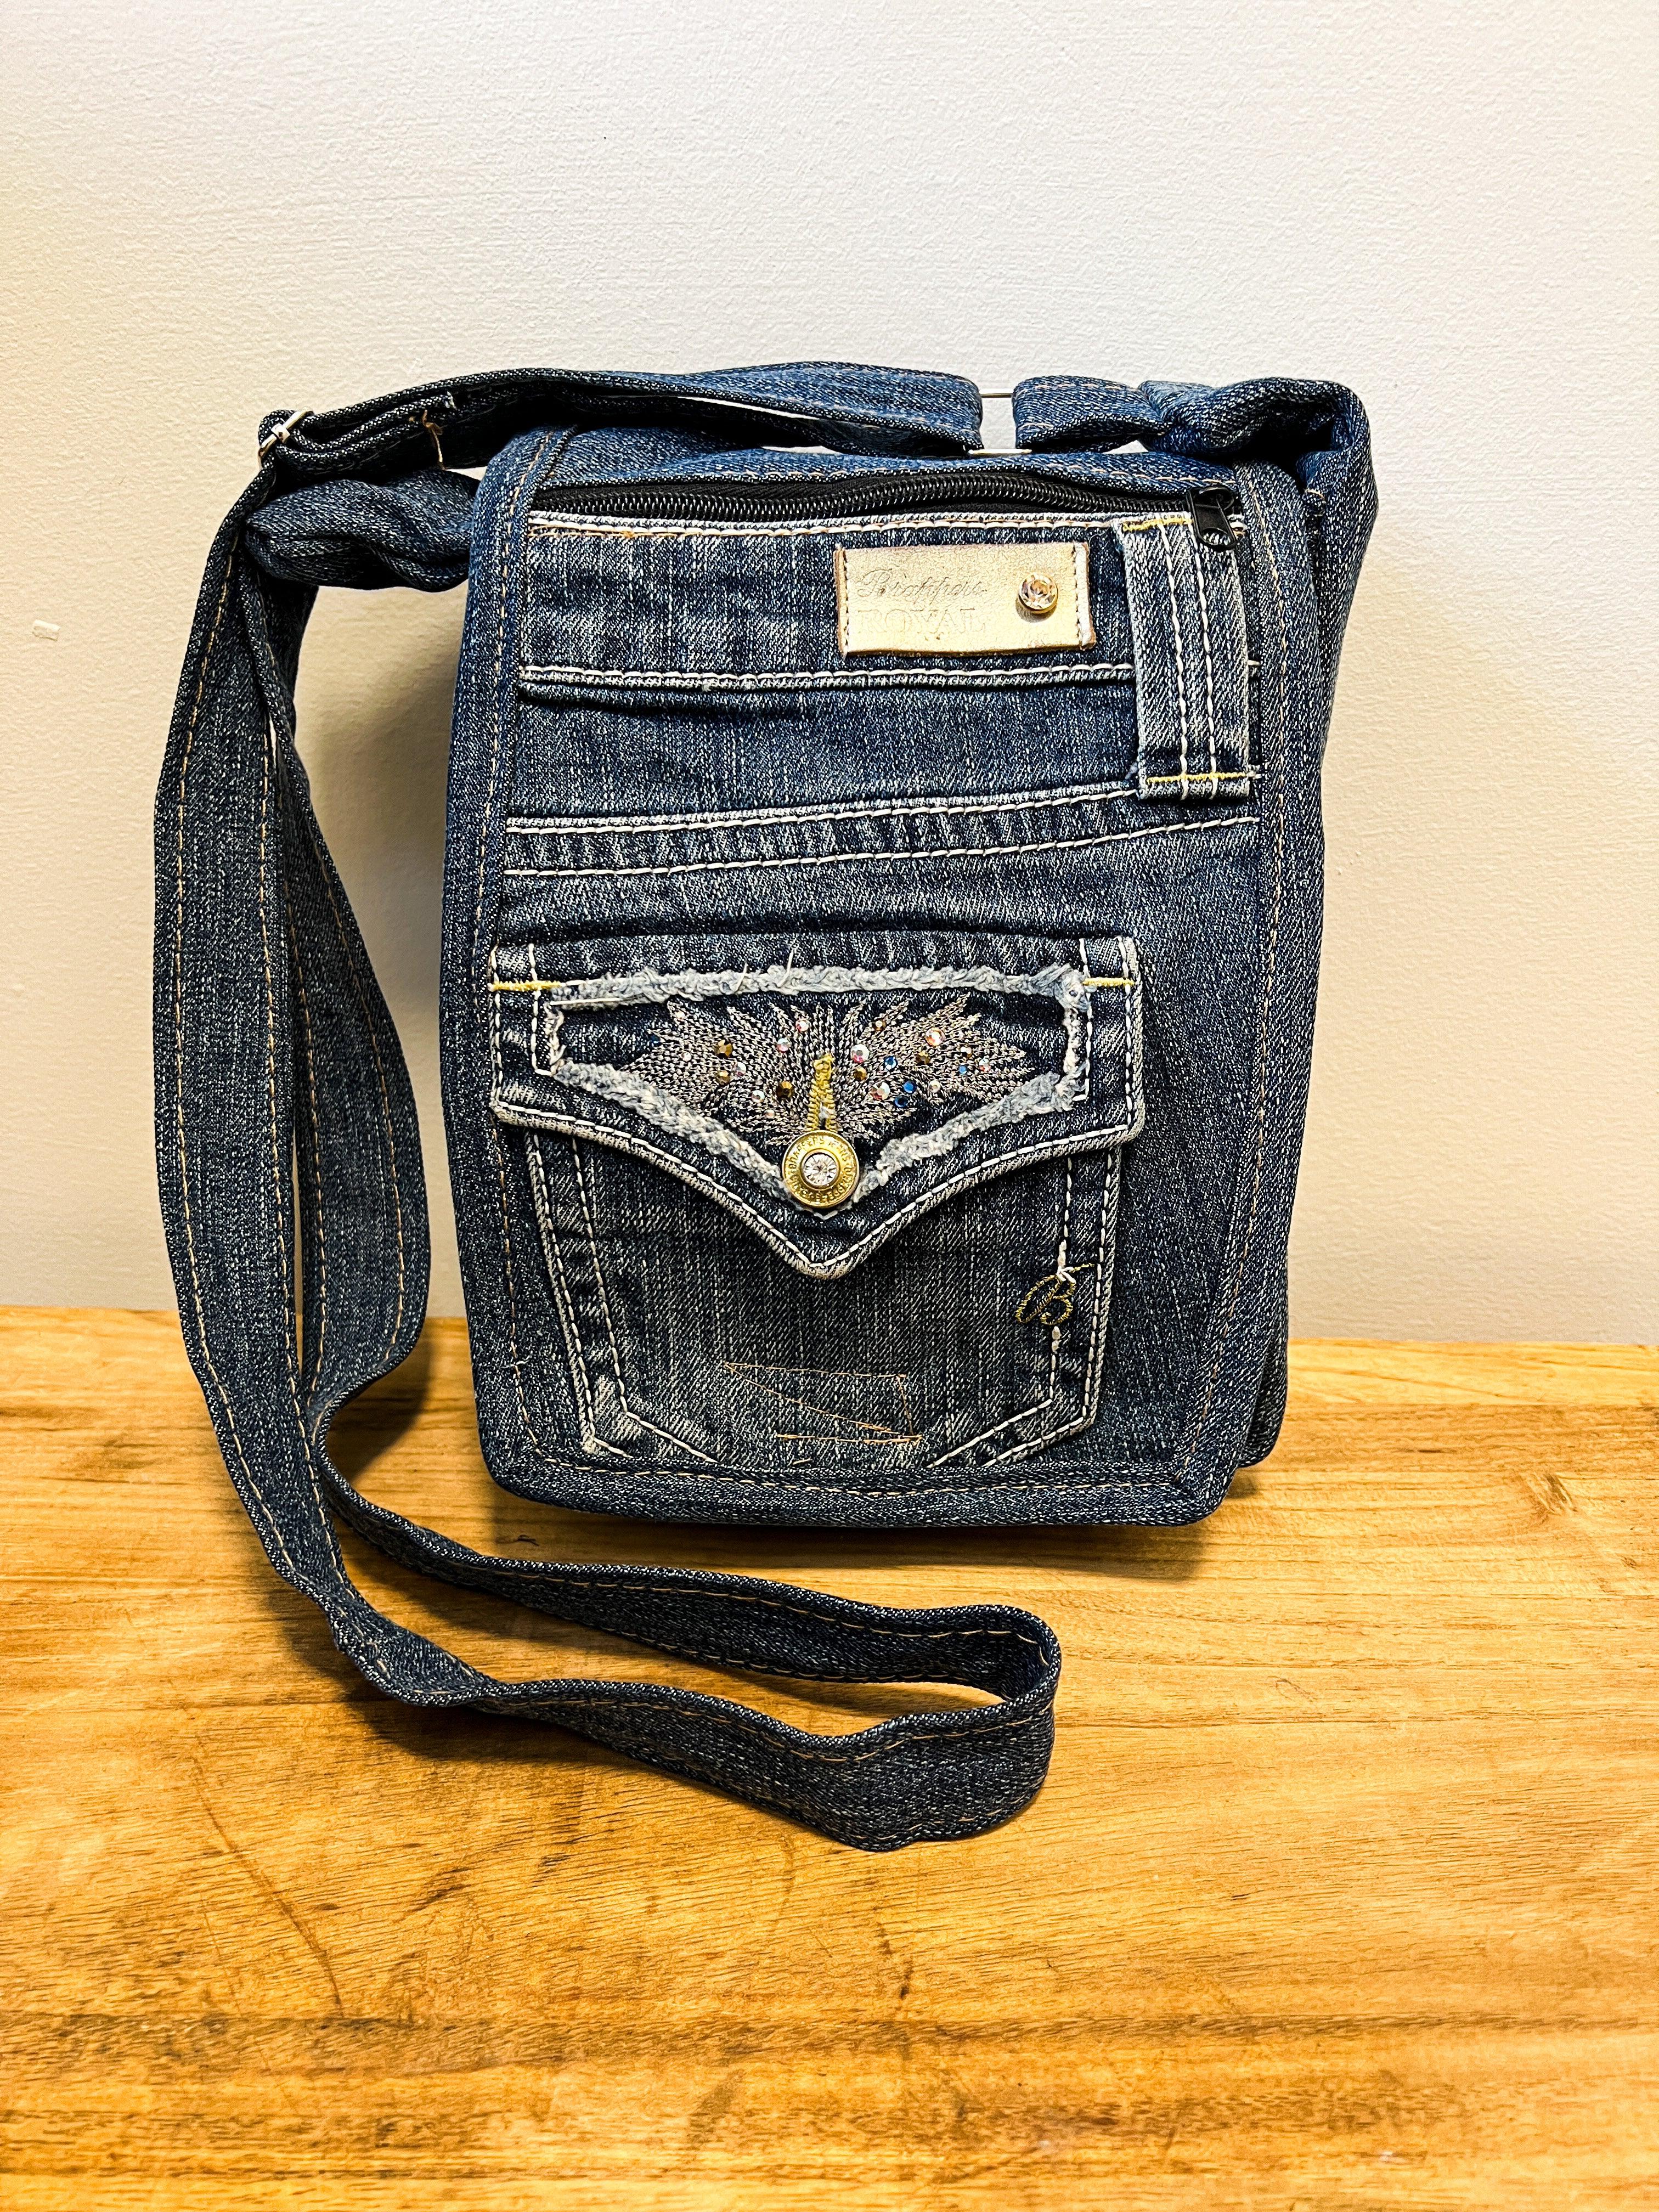 Buy JEANS BAG Handmade Denim Jeans Bags in Recycled Jeans With Decorations  and an Owl-shaped Key Holder in Cotton Online in India - Etsy